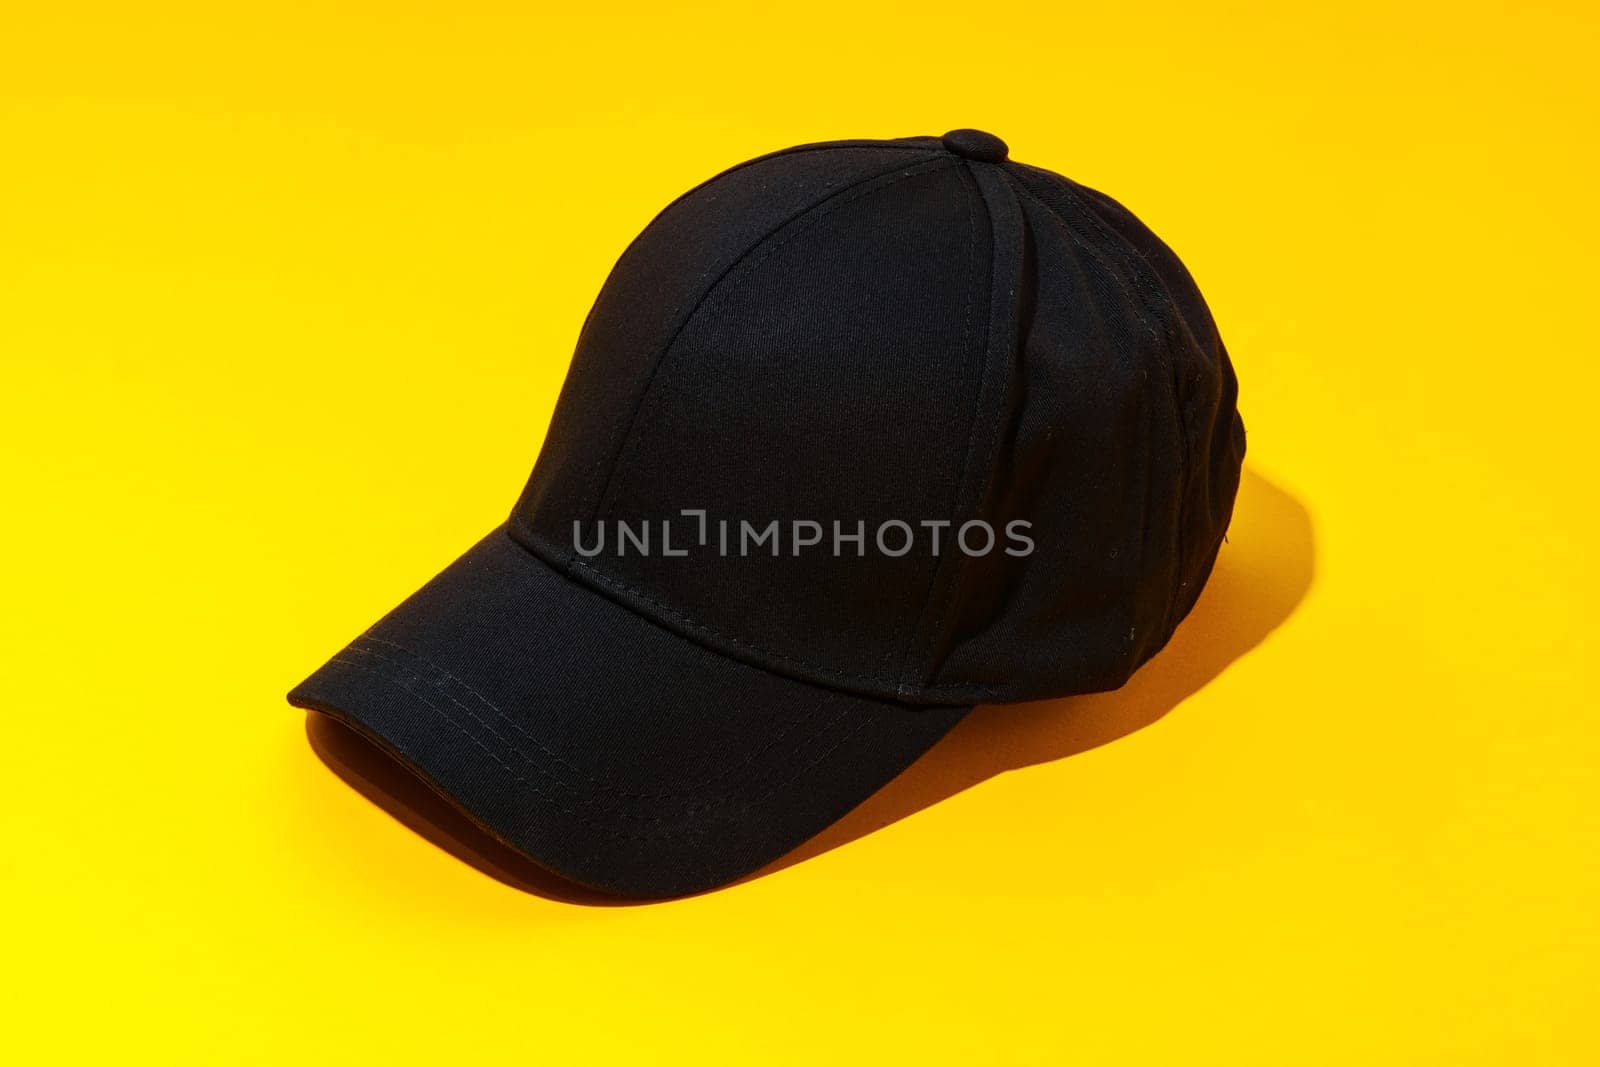 Baseball hat against yellow background in studio close up